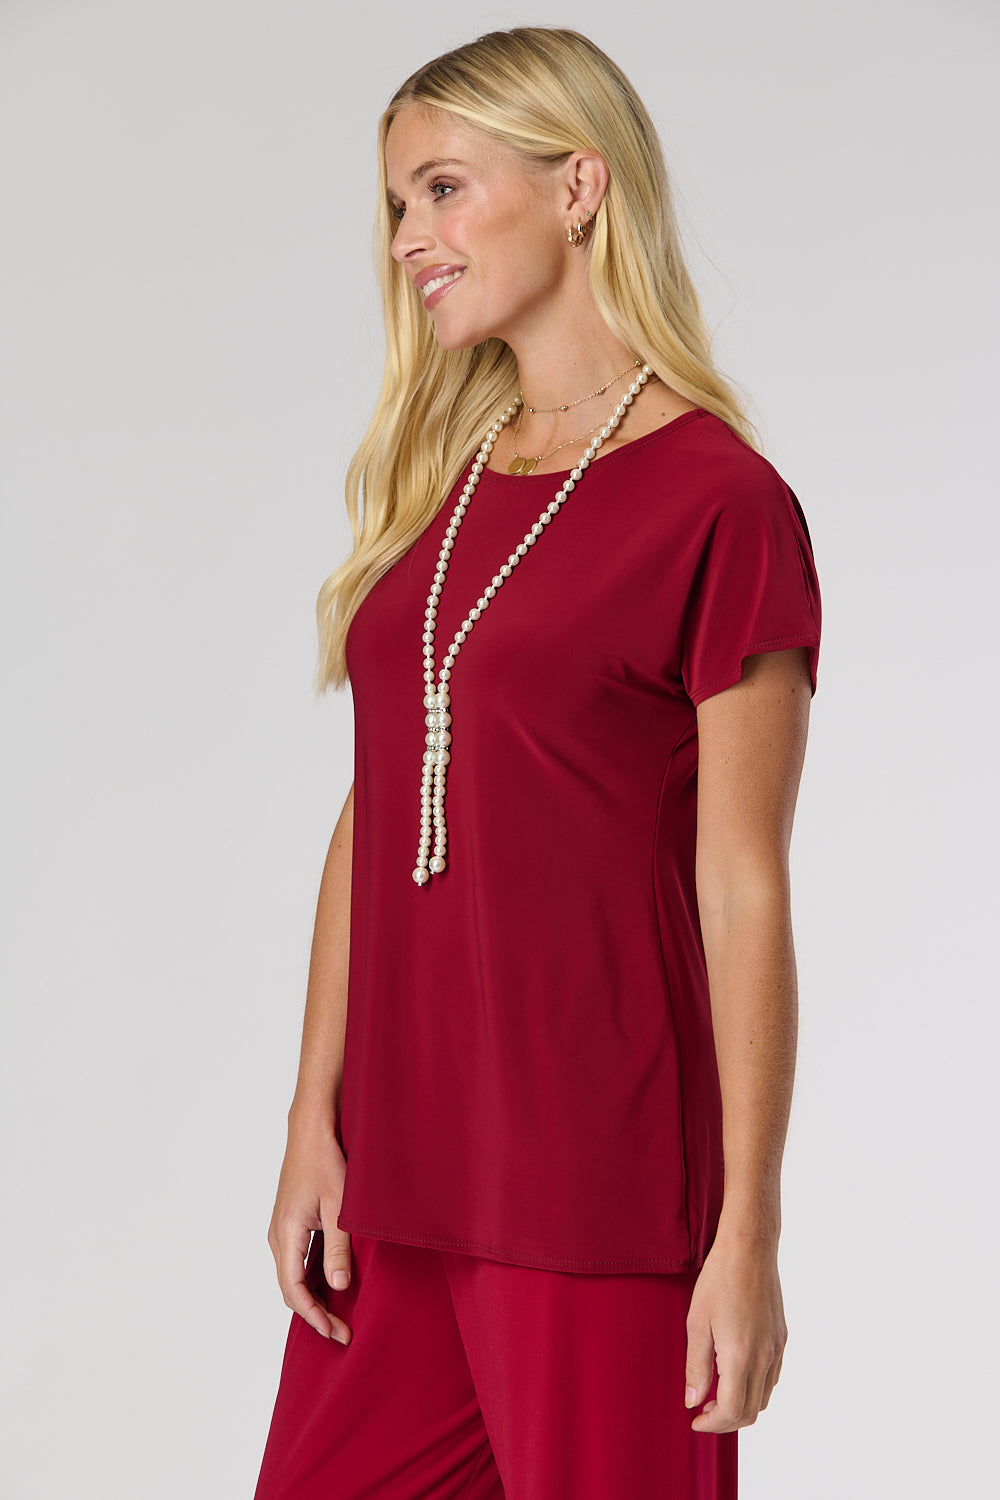 Saloos Essential Extended-Shoulder Top with Necklace